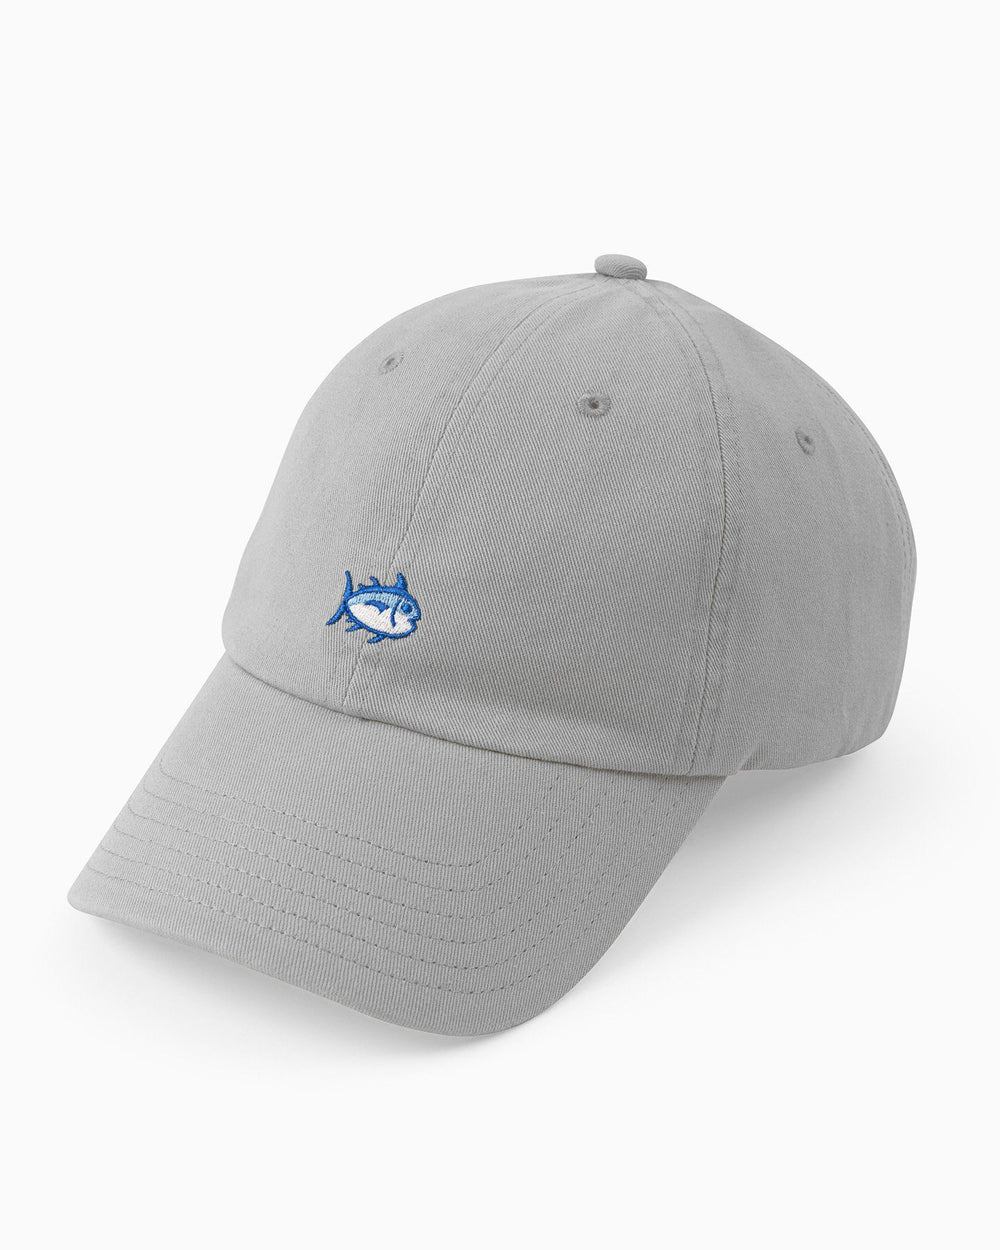 The front of the Skipjack Hat by Southern Tide - Steel Grey